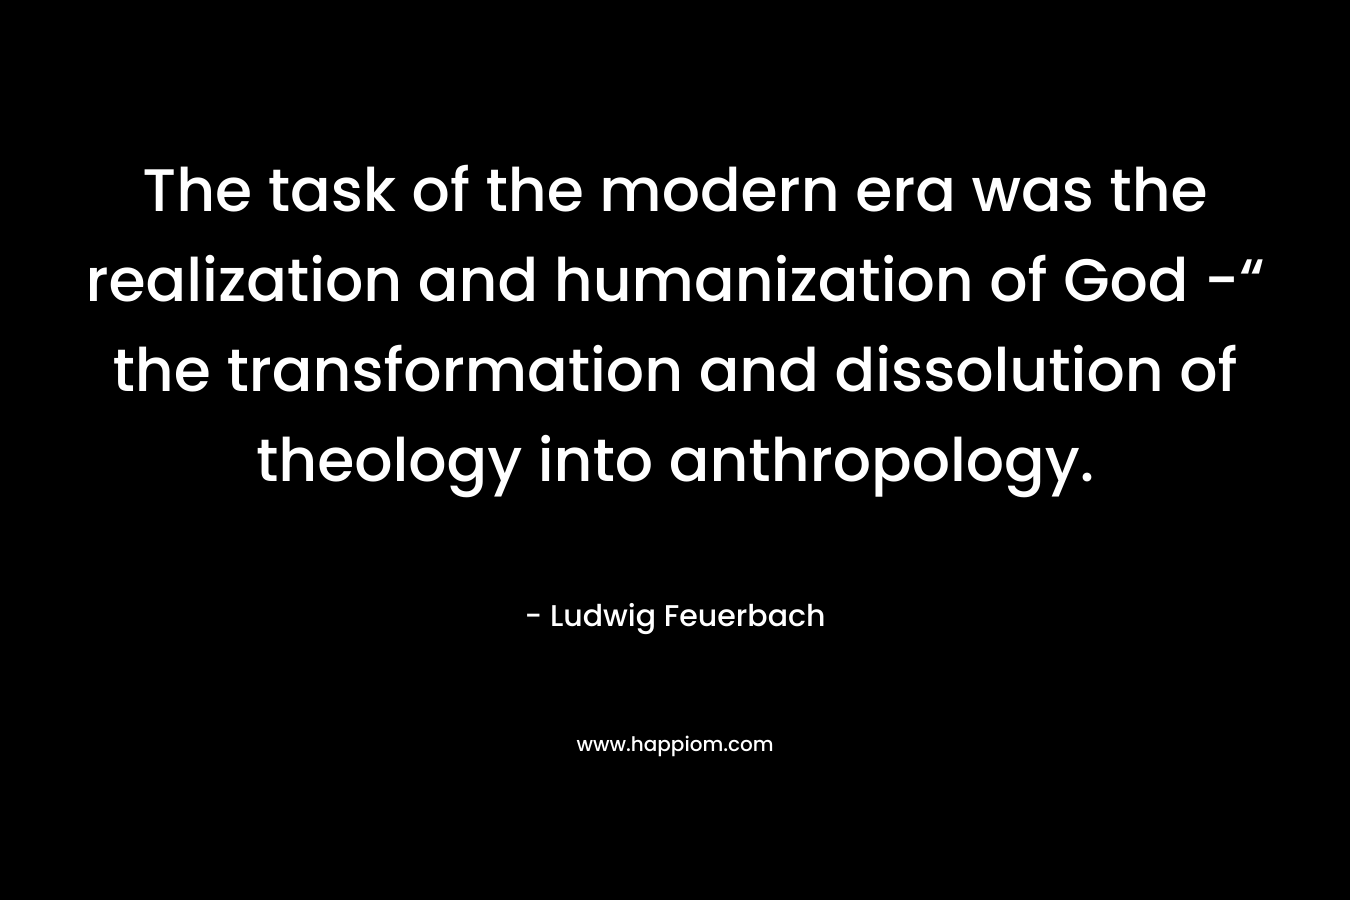 The task of the modern era was the realization and humanization of God -“ the transformation and dissolution of theology into anthropology. – Ludwig Feuerbach